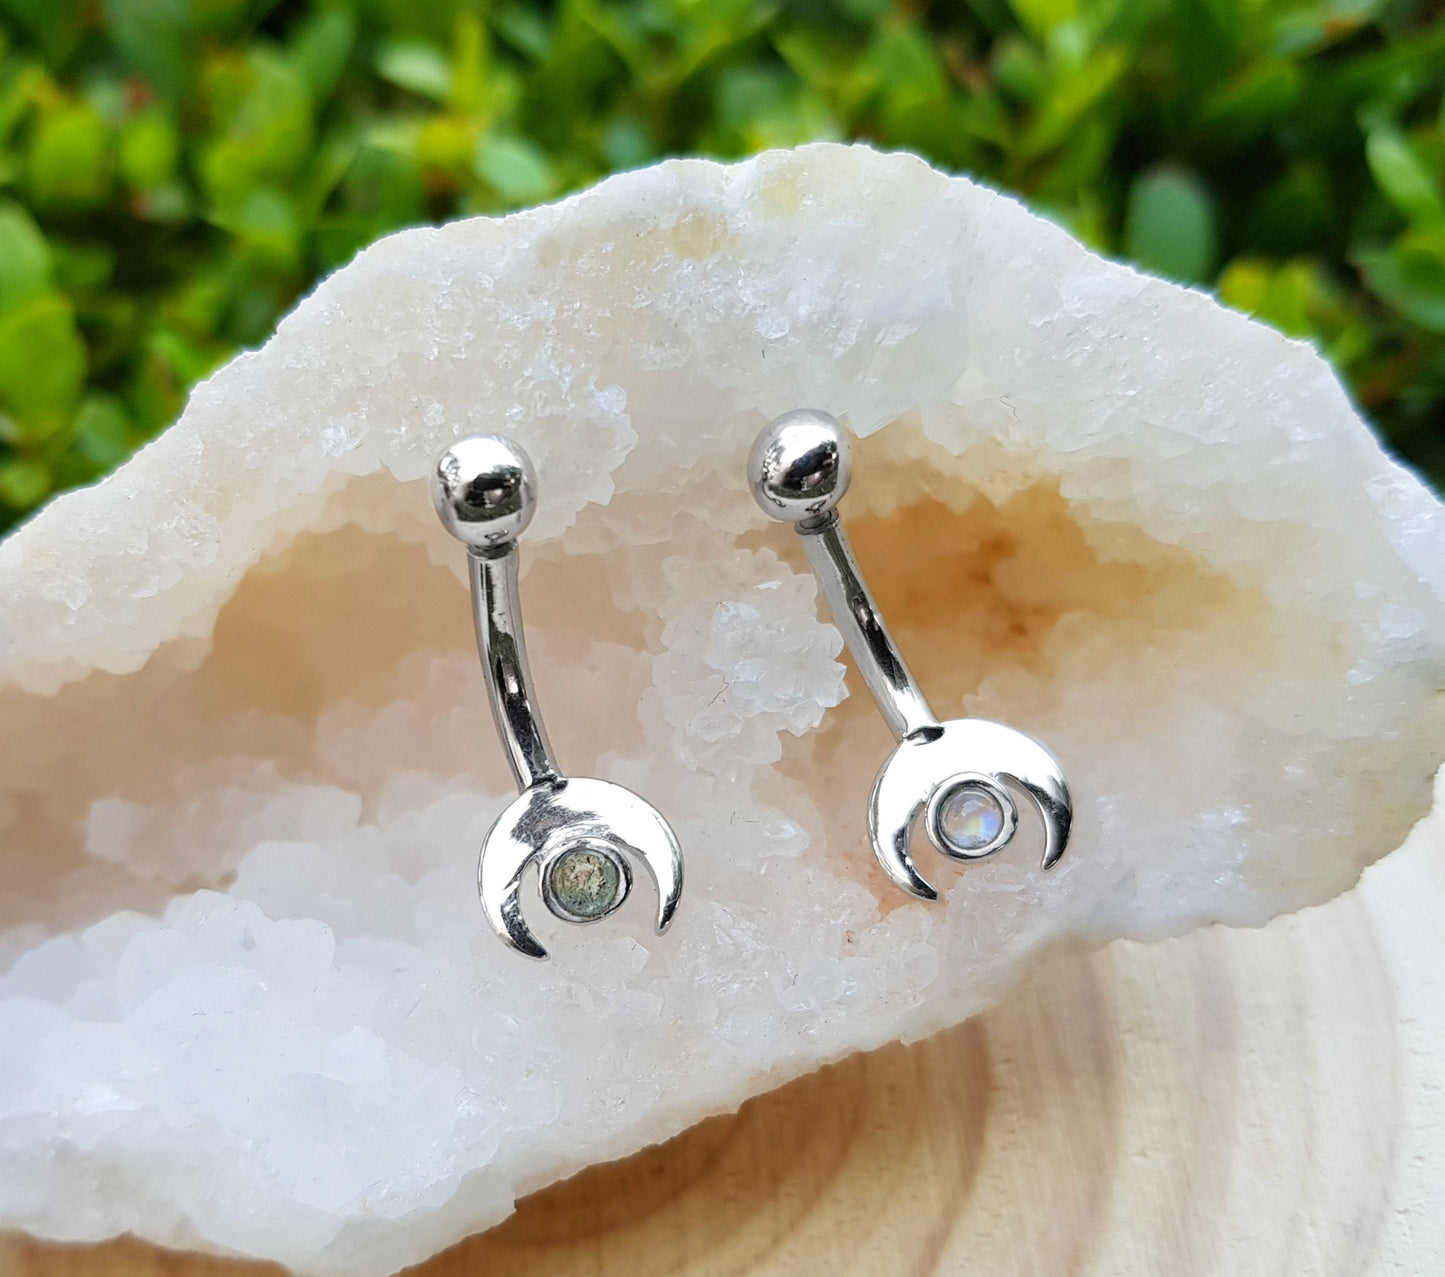 Rainbow Moonstone Belly Button Ring, Sterling Silver Hypoallergenic Belly Ring, Labradorite Belly Bar, Boho Belly Ring, Celestial Jewelry